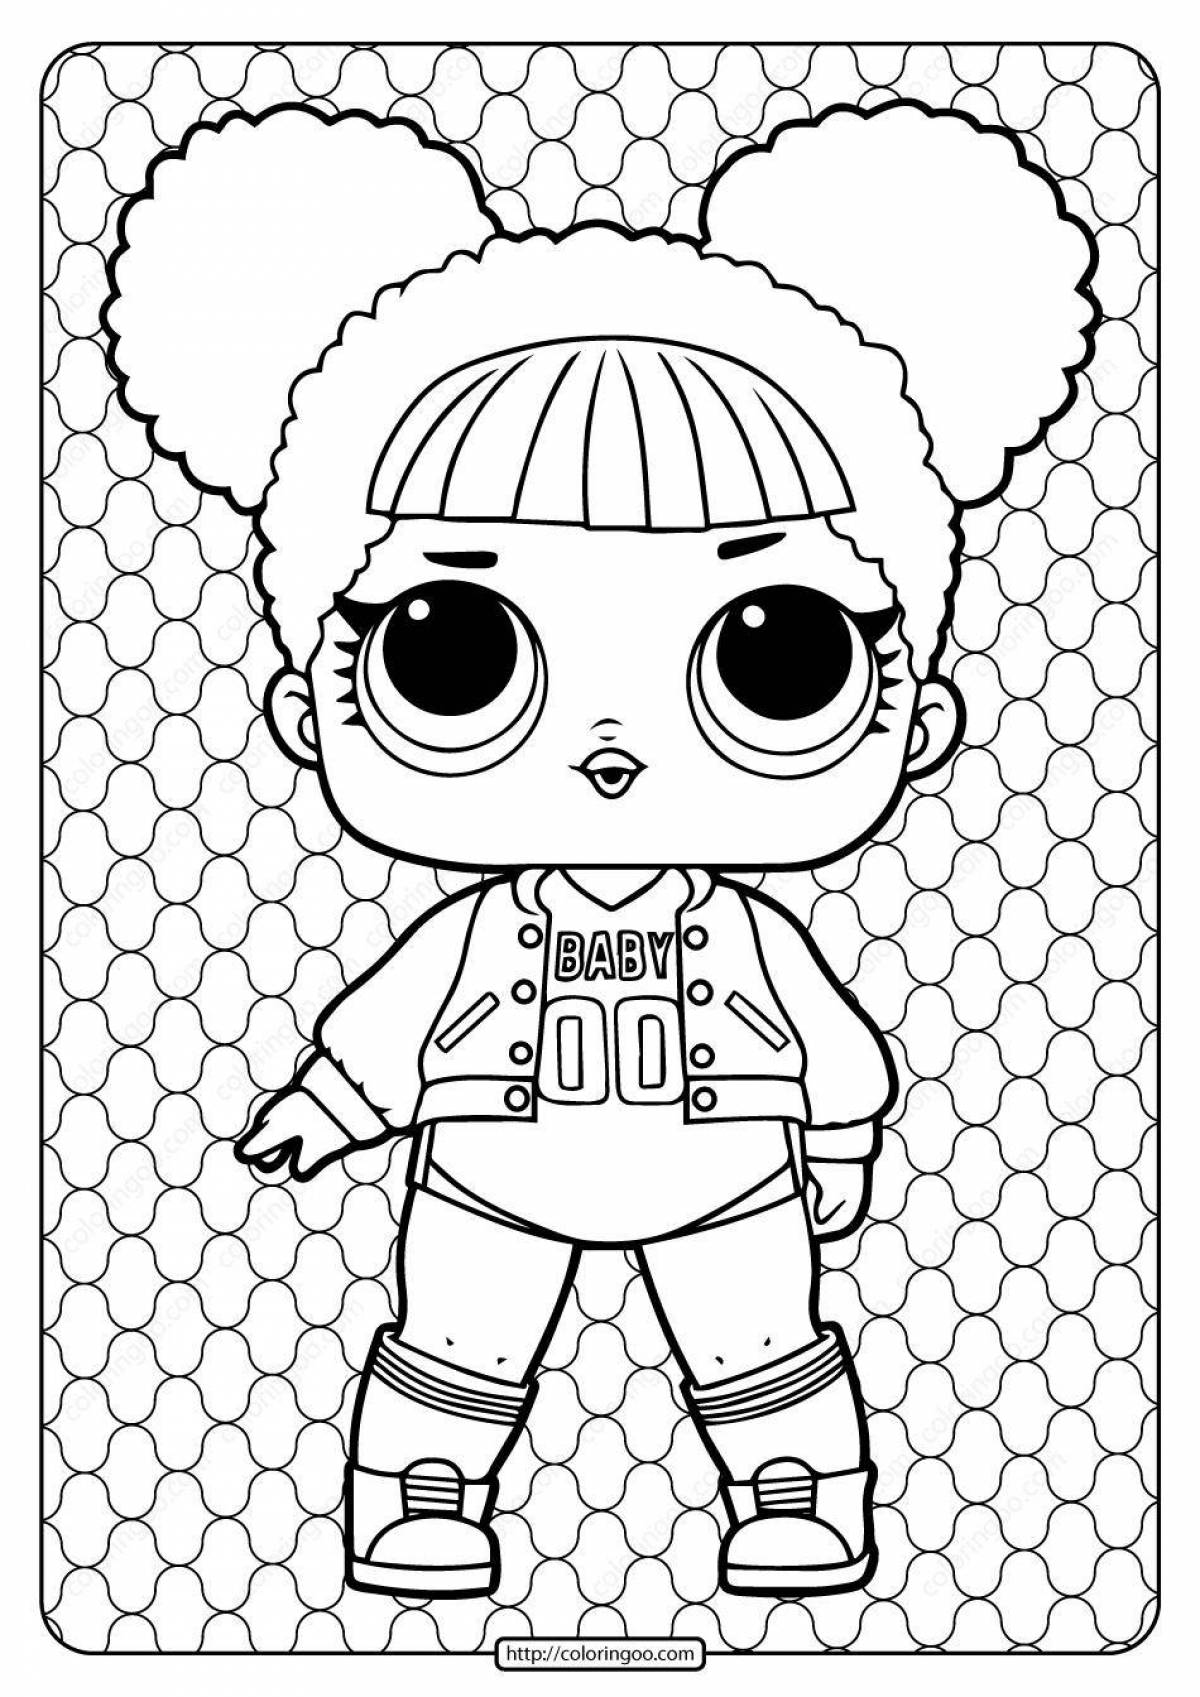 Awesome lol print doll coloring pages